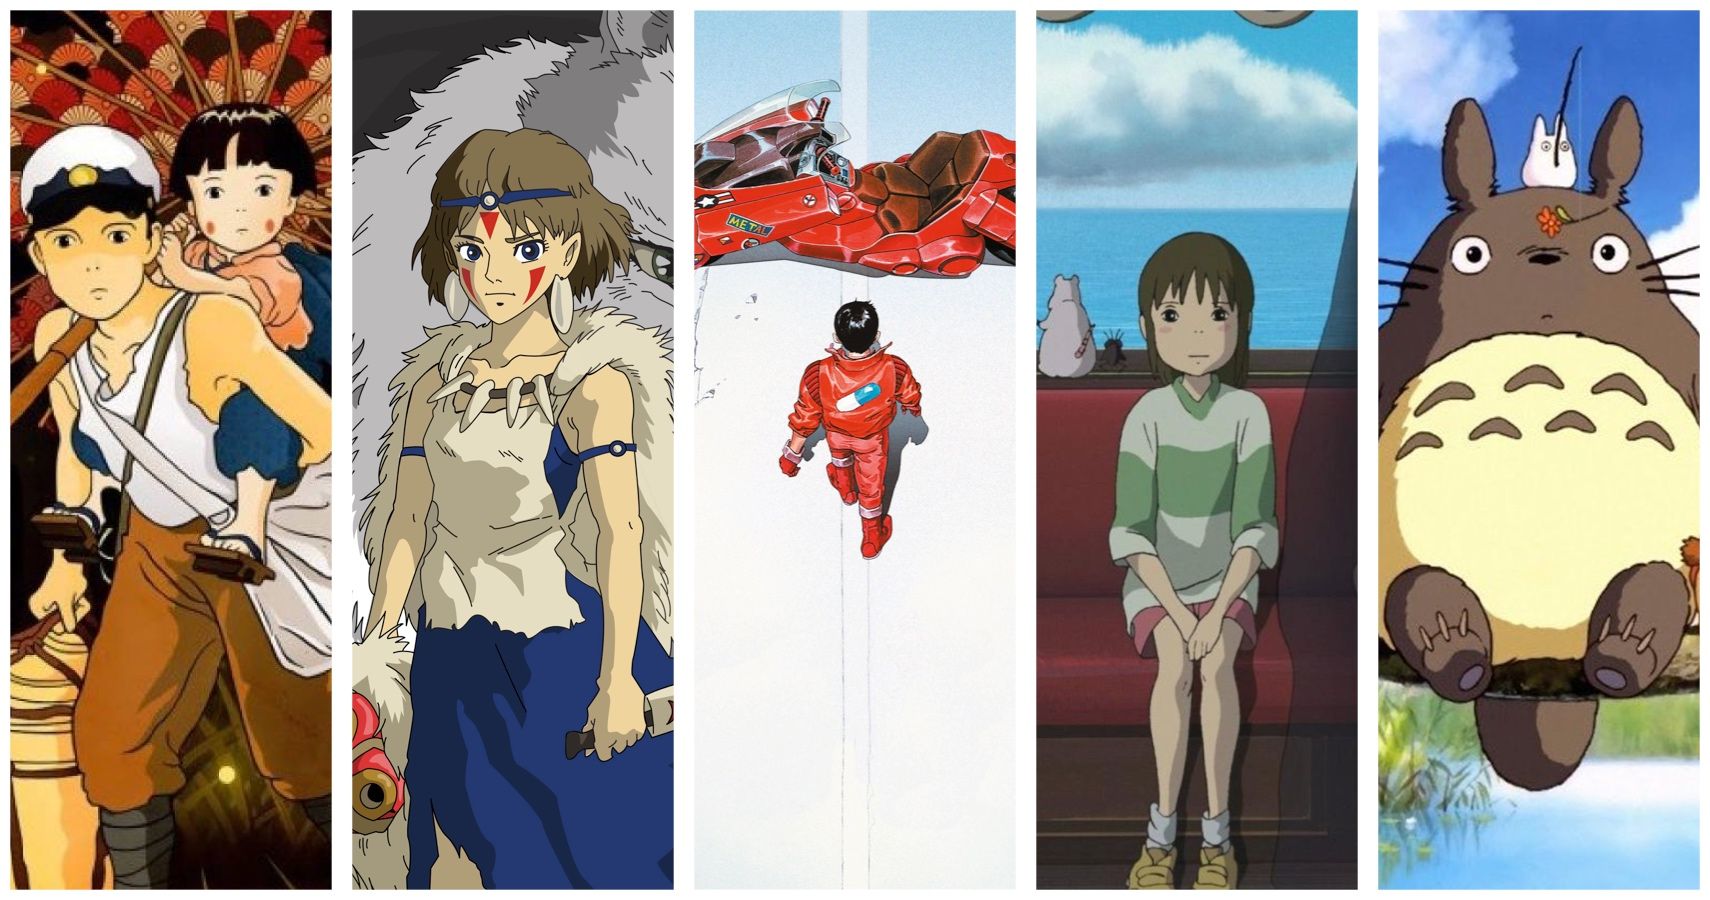 The 10 Greatest Anime Films Of All Time, According To IMDb